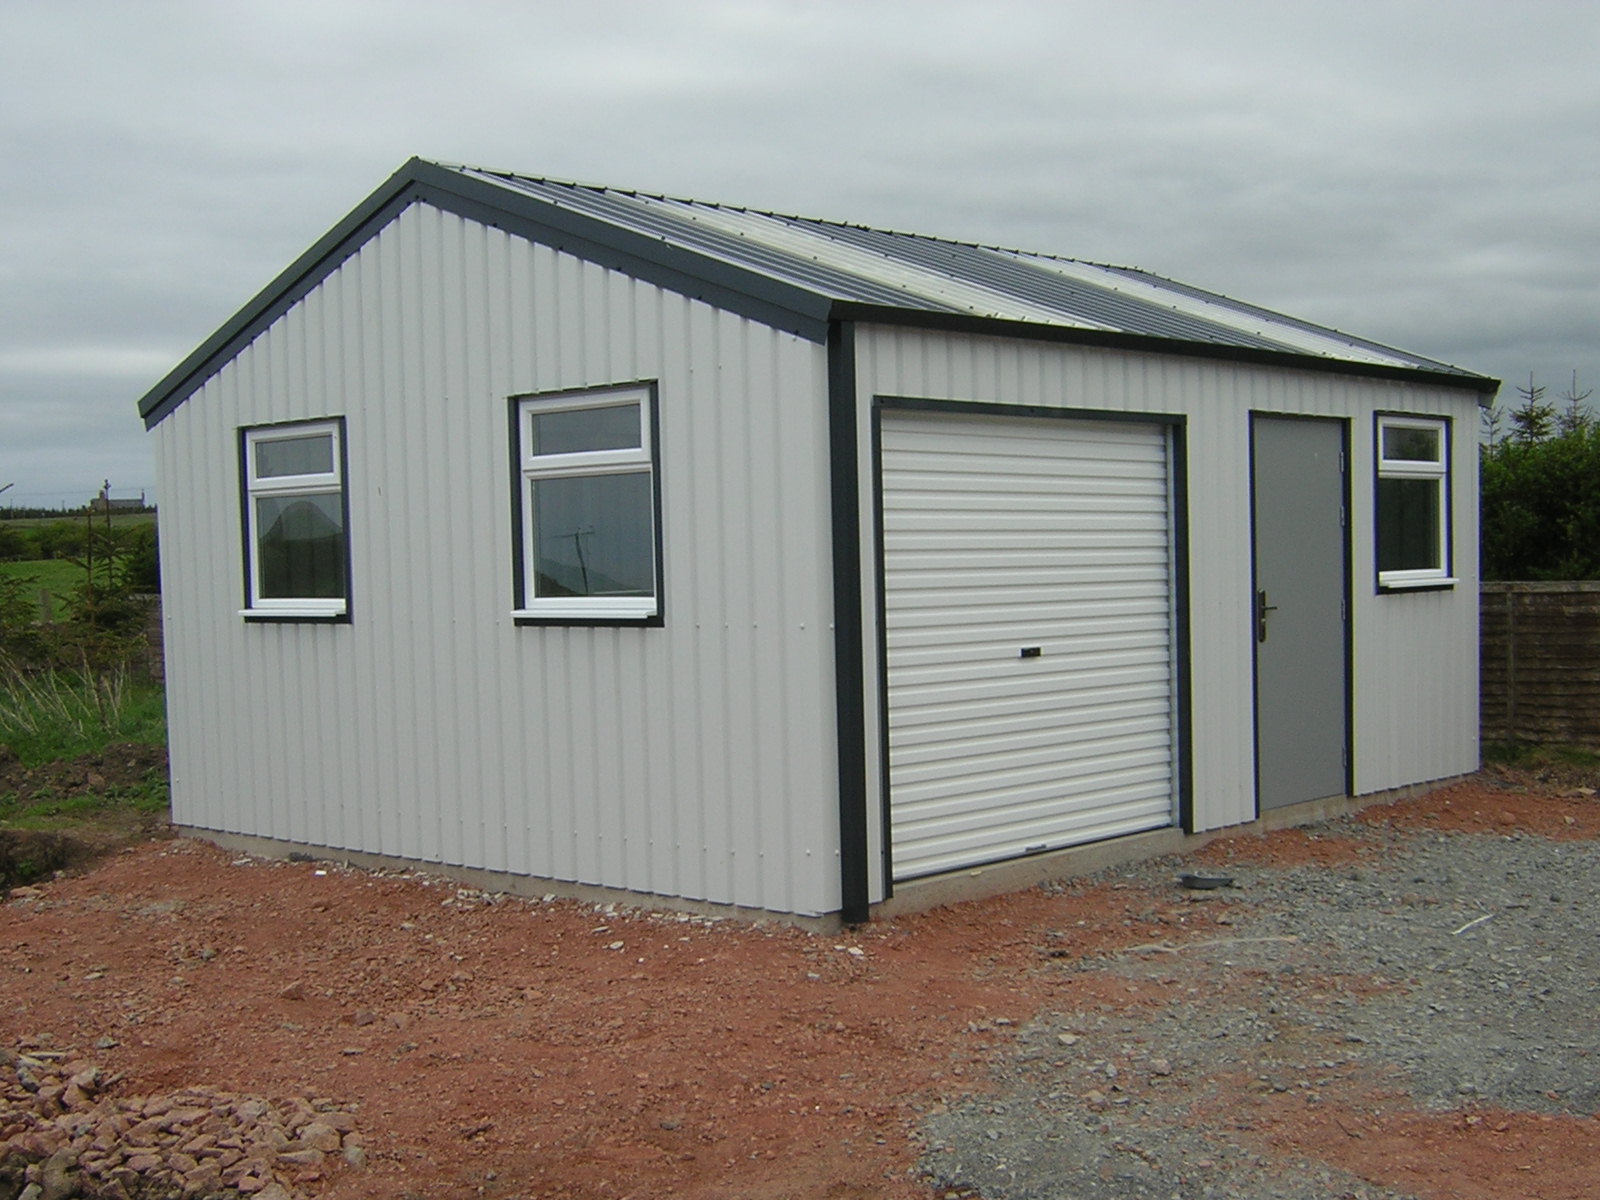 Bespoke Steel Buildings For Domestic Workshops In Leicestershire